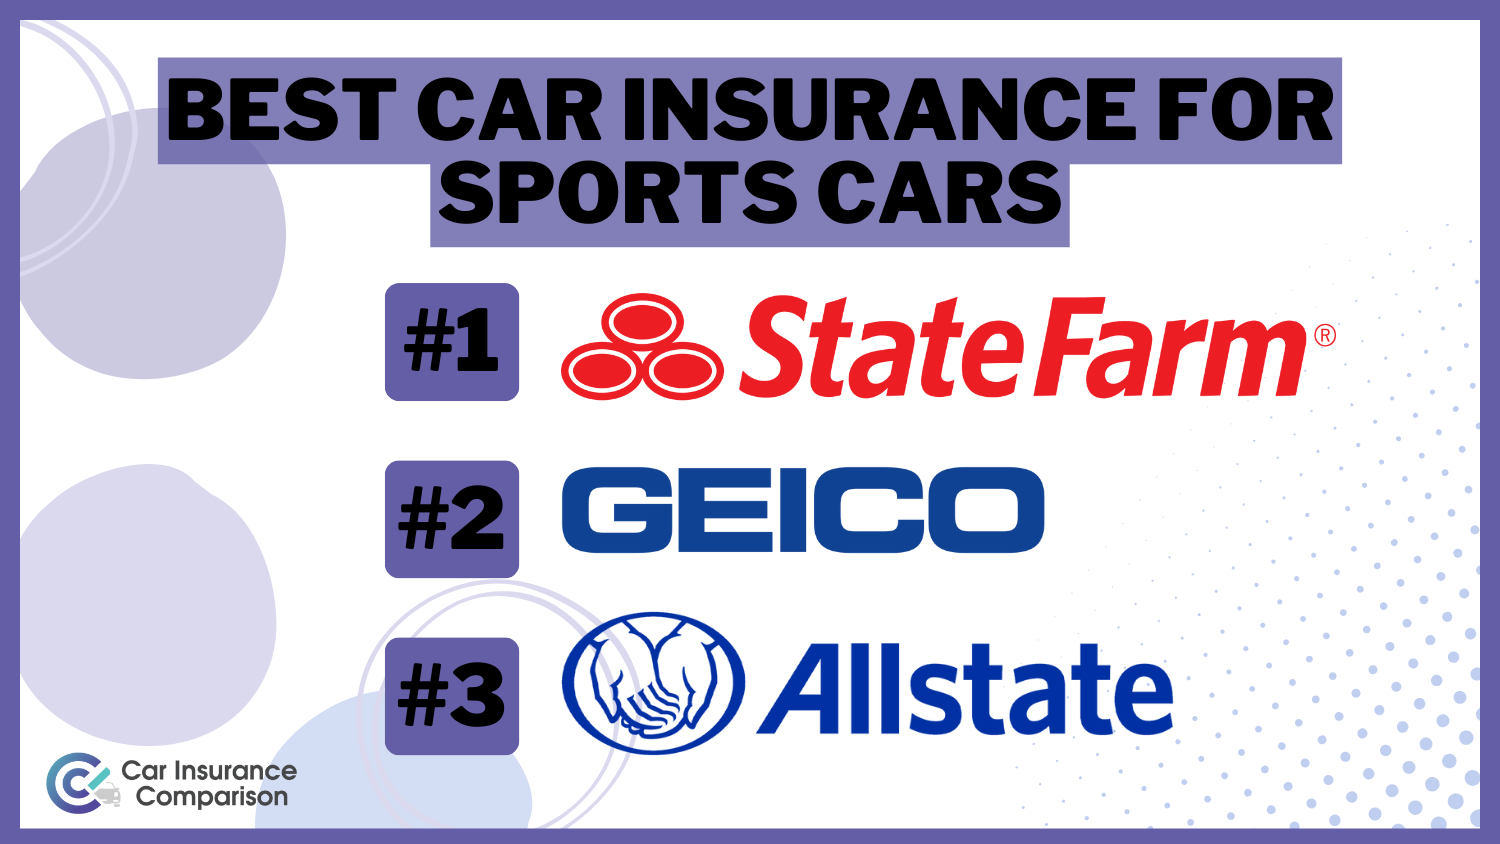 3 Best Car Insurance for Sports Cars: State Farm, Geico, Allstate